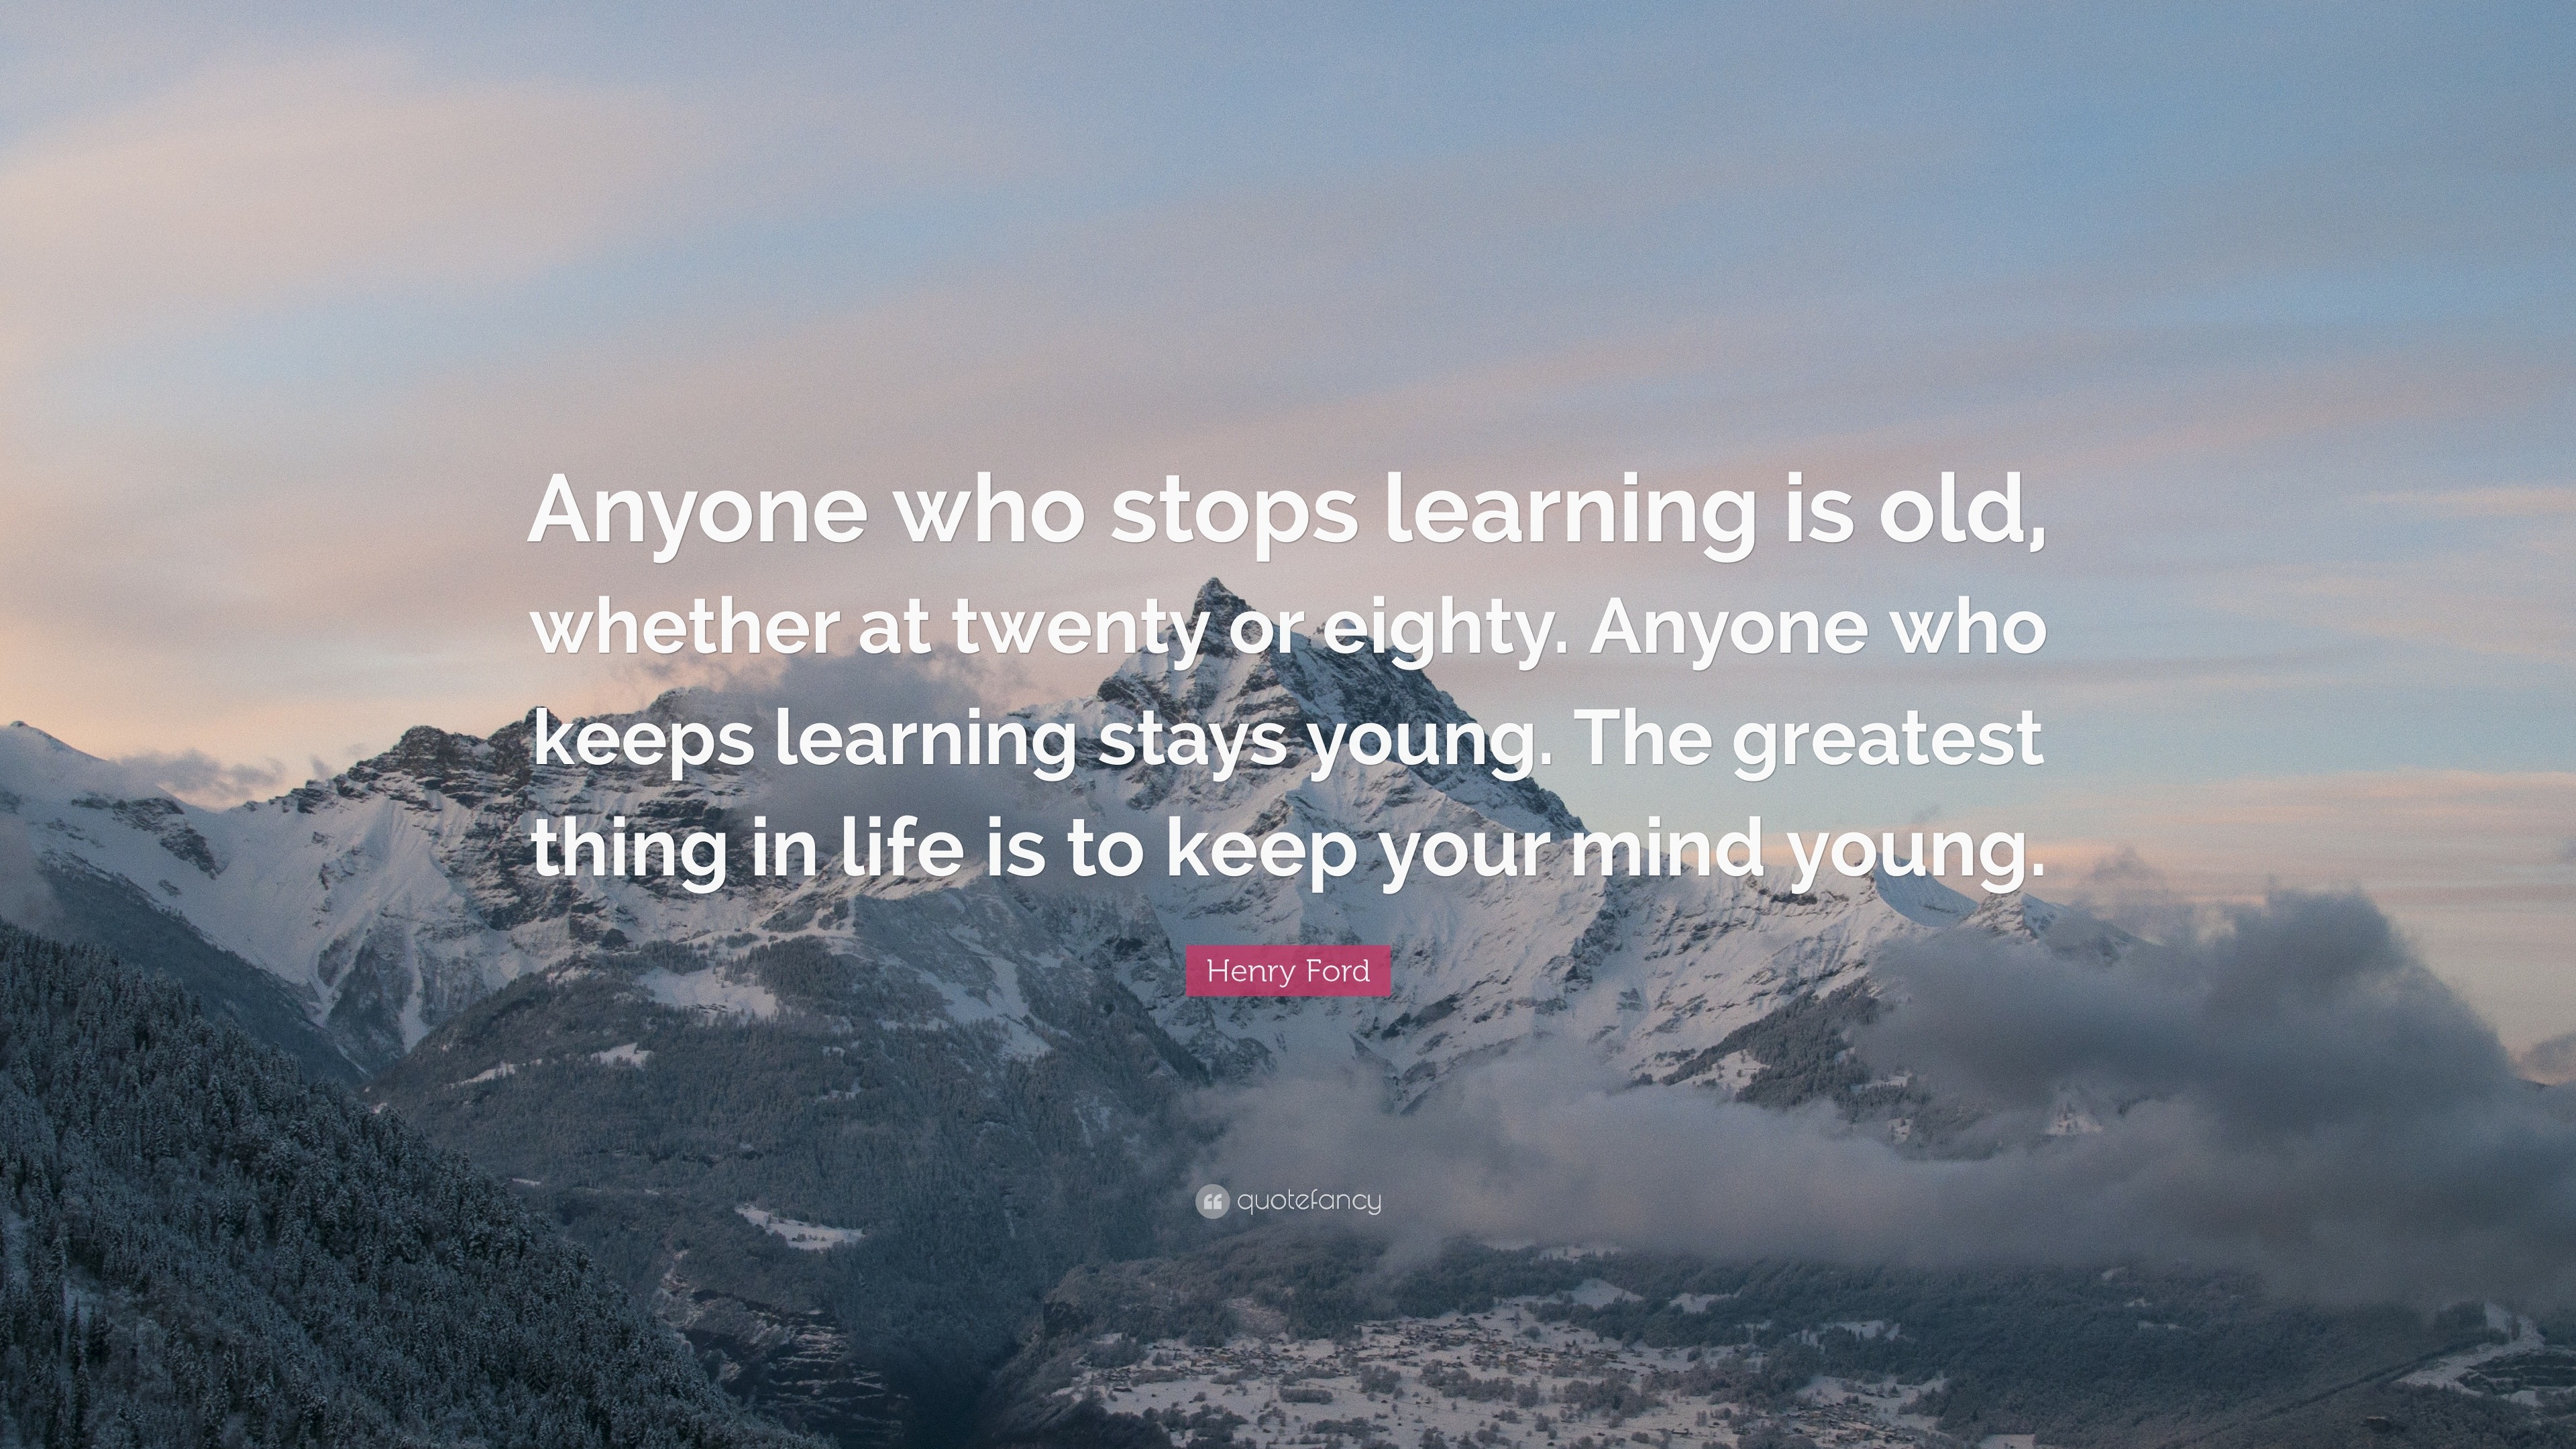 Henry ford quote anyone who stops learning is old #6